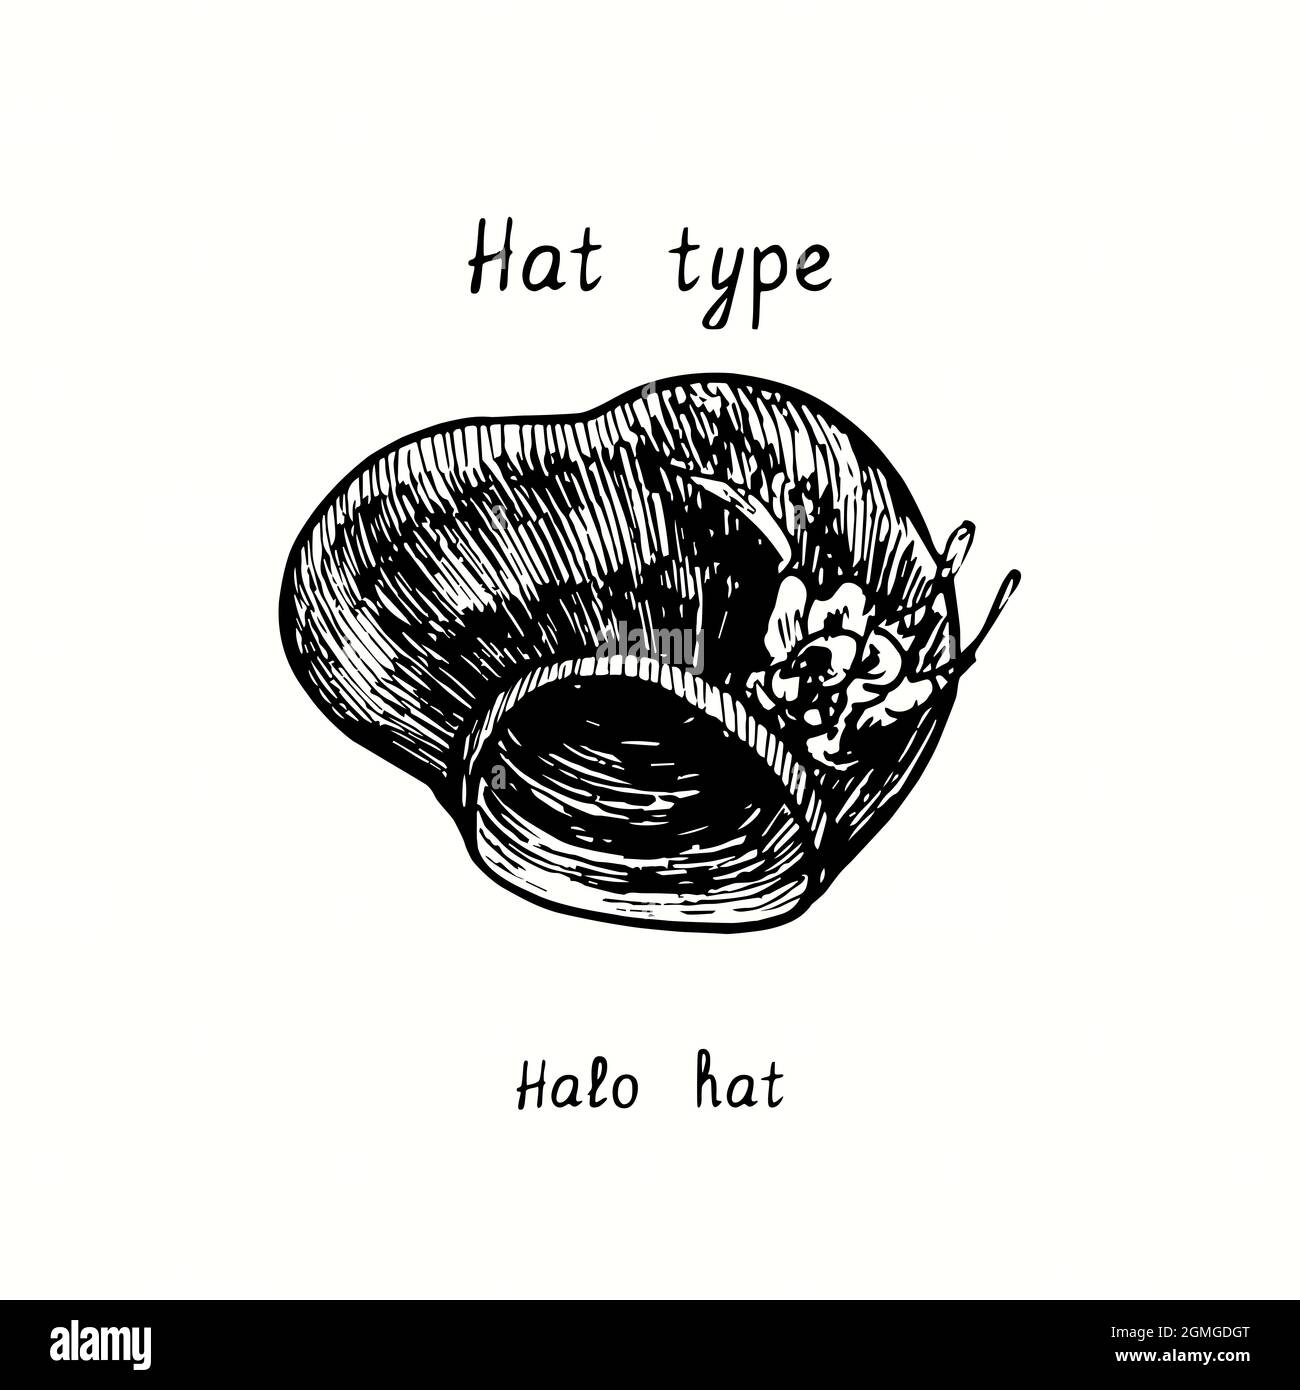 Hat type, halo. Ink black and white drawing illustration Stock Photo